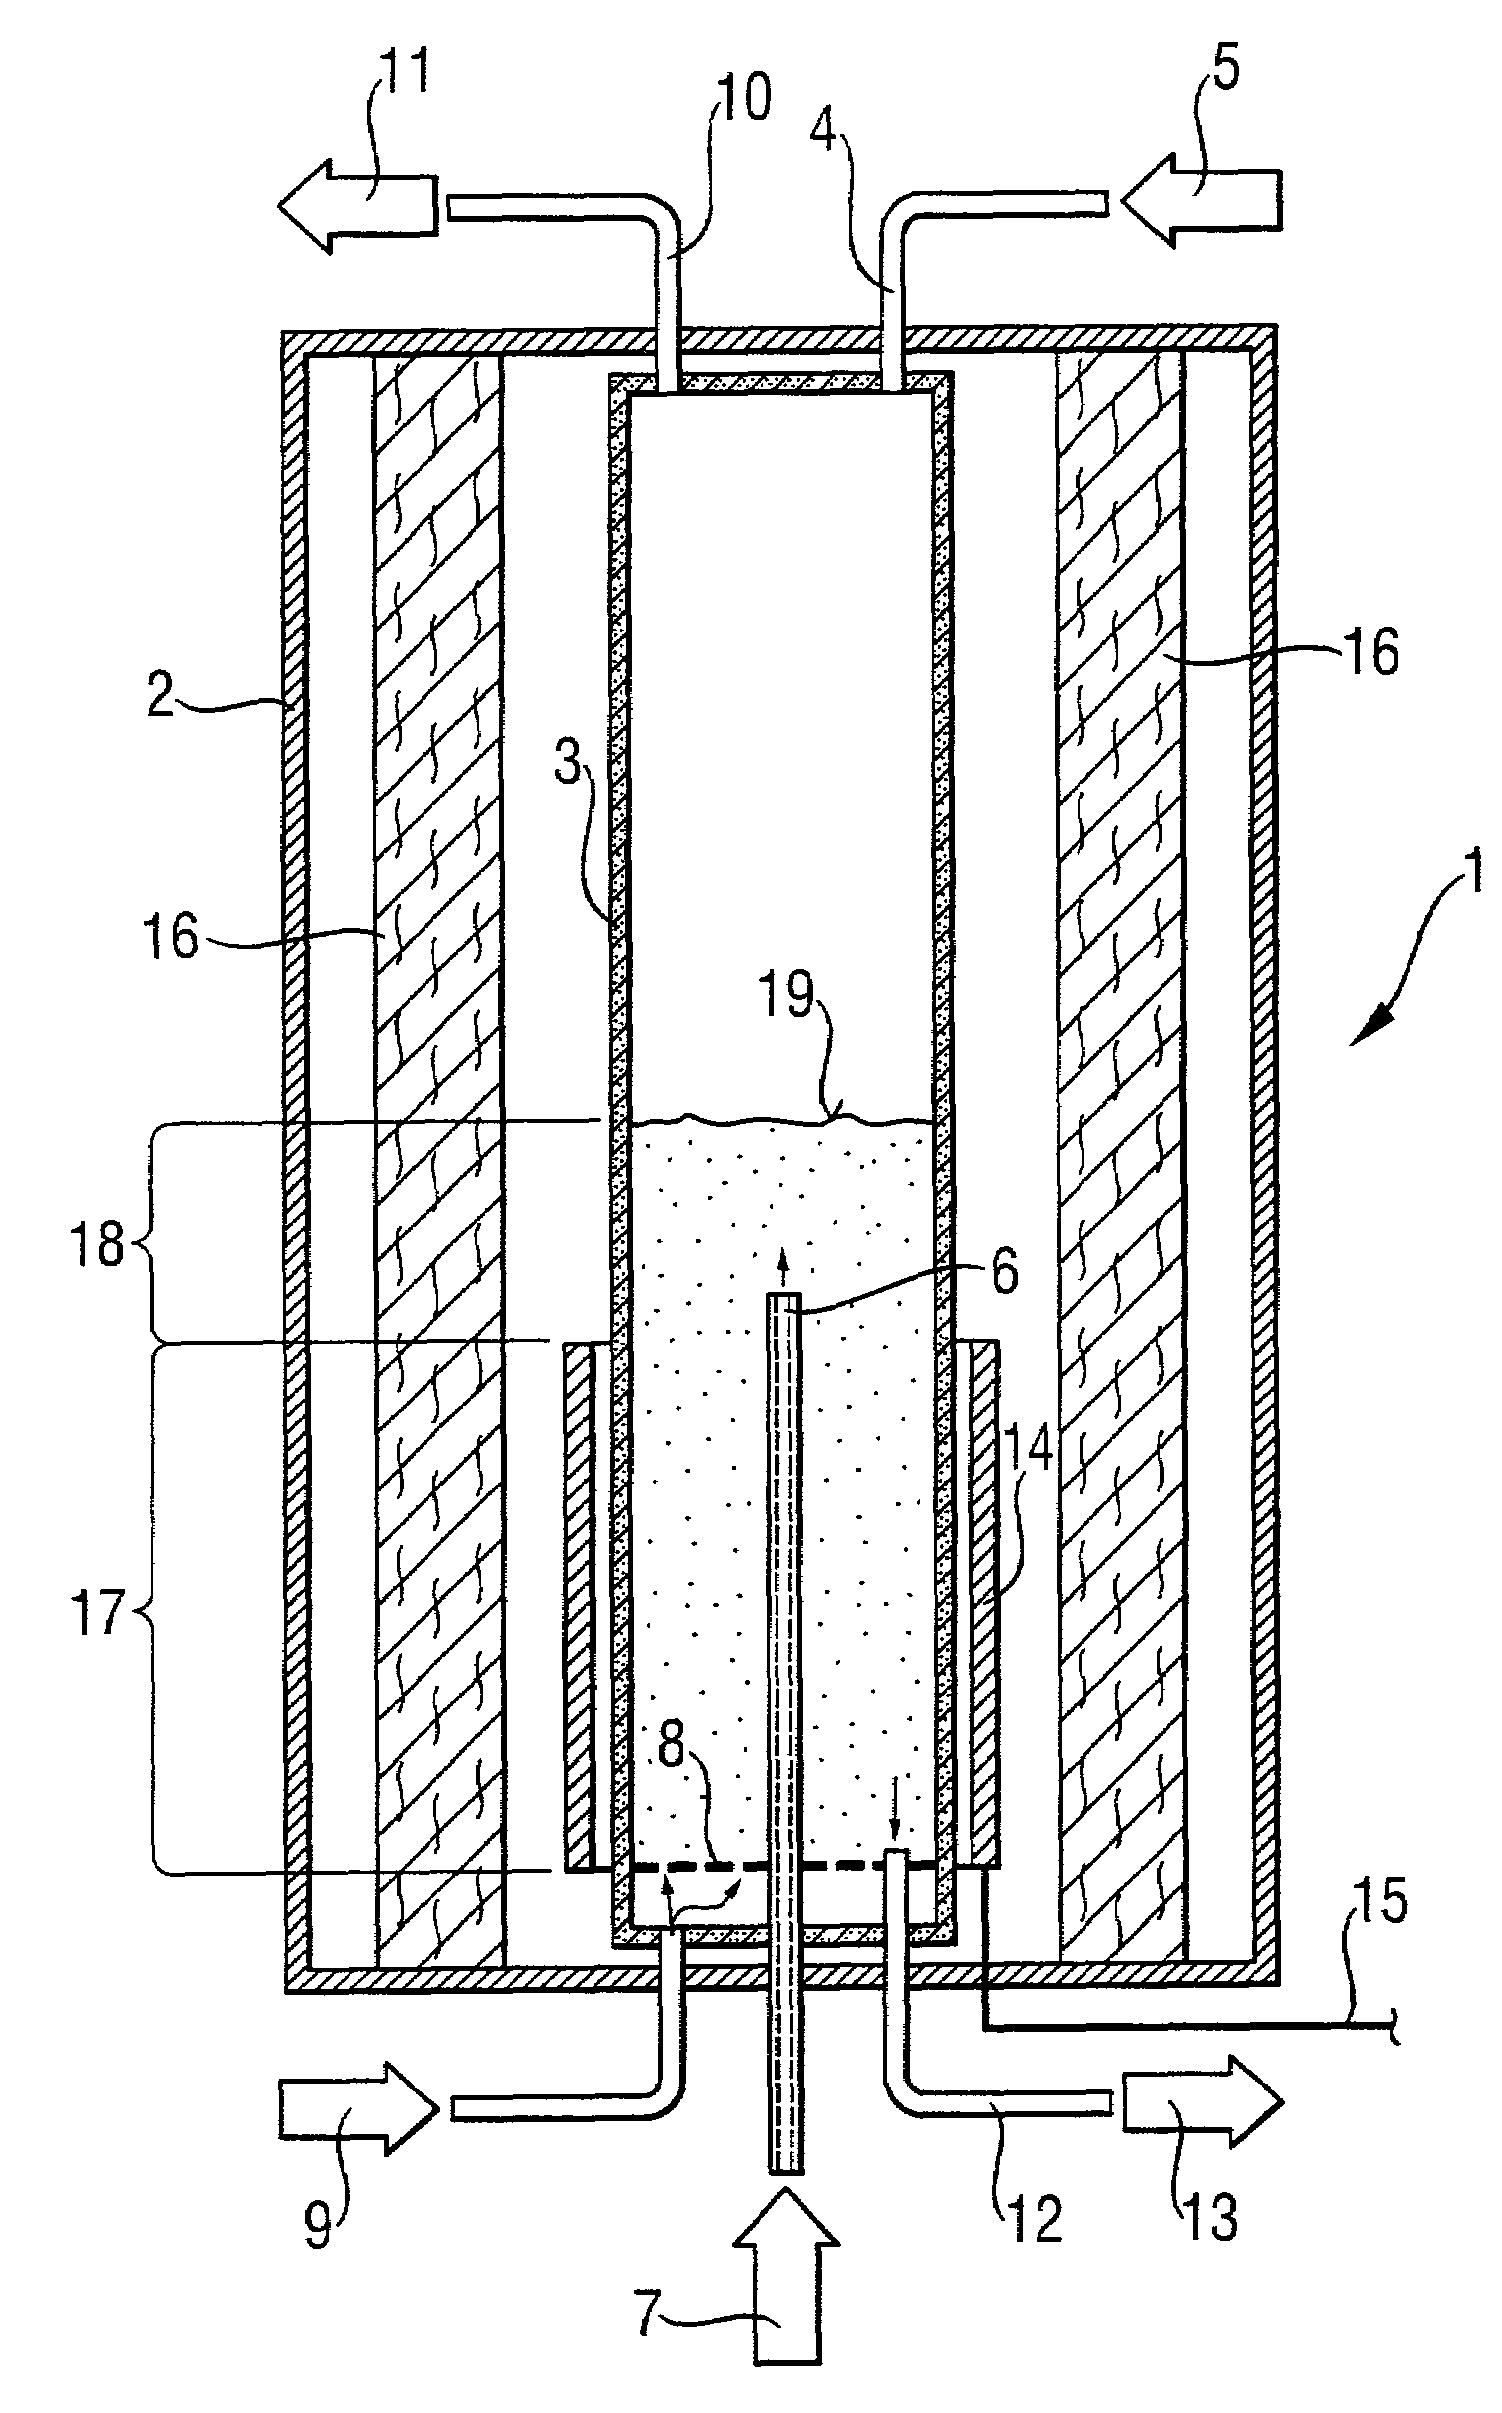 Radiation-heated fluidized-bed reactor